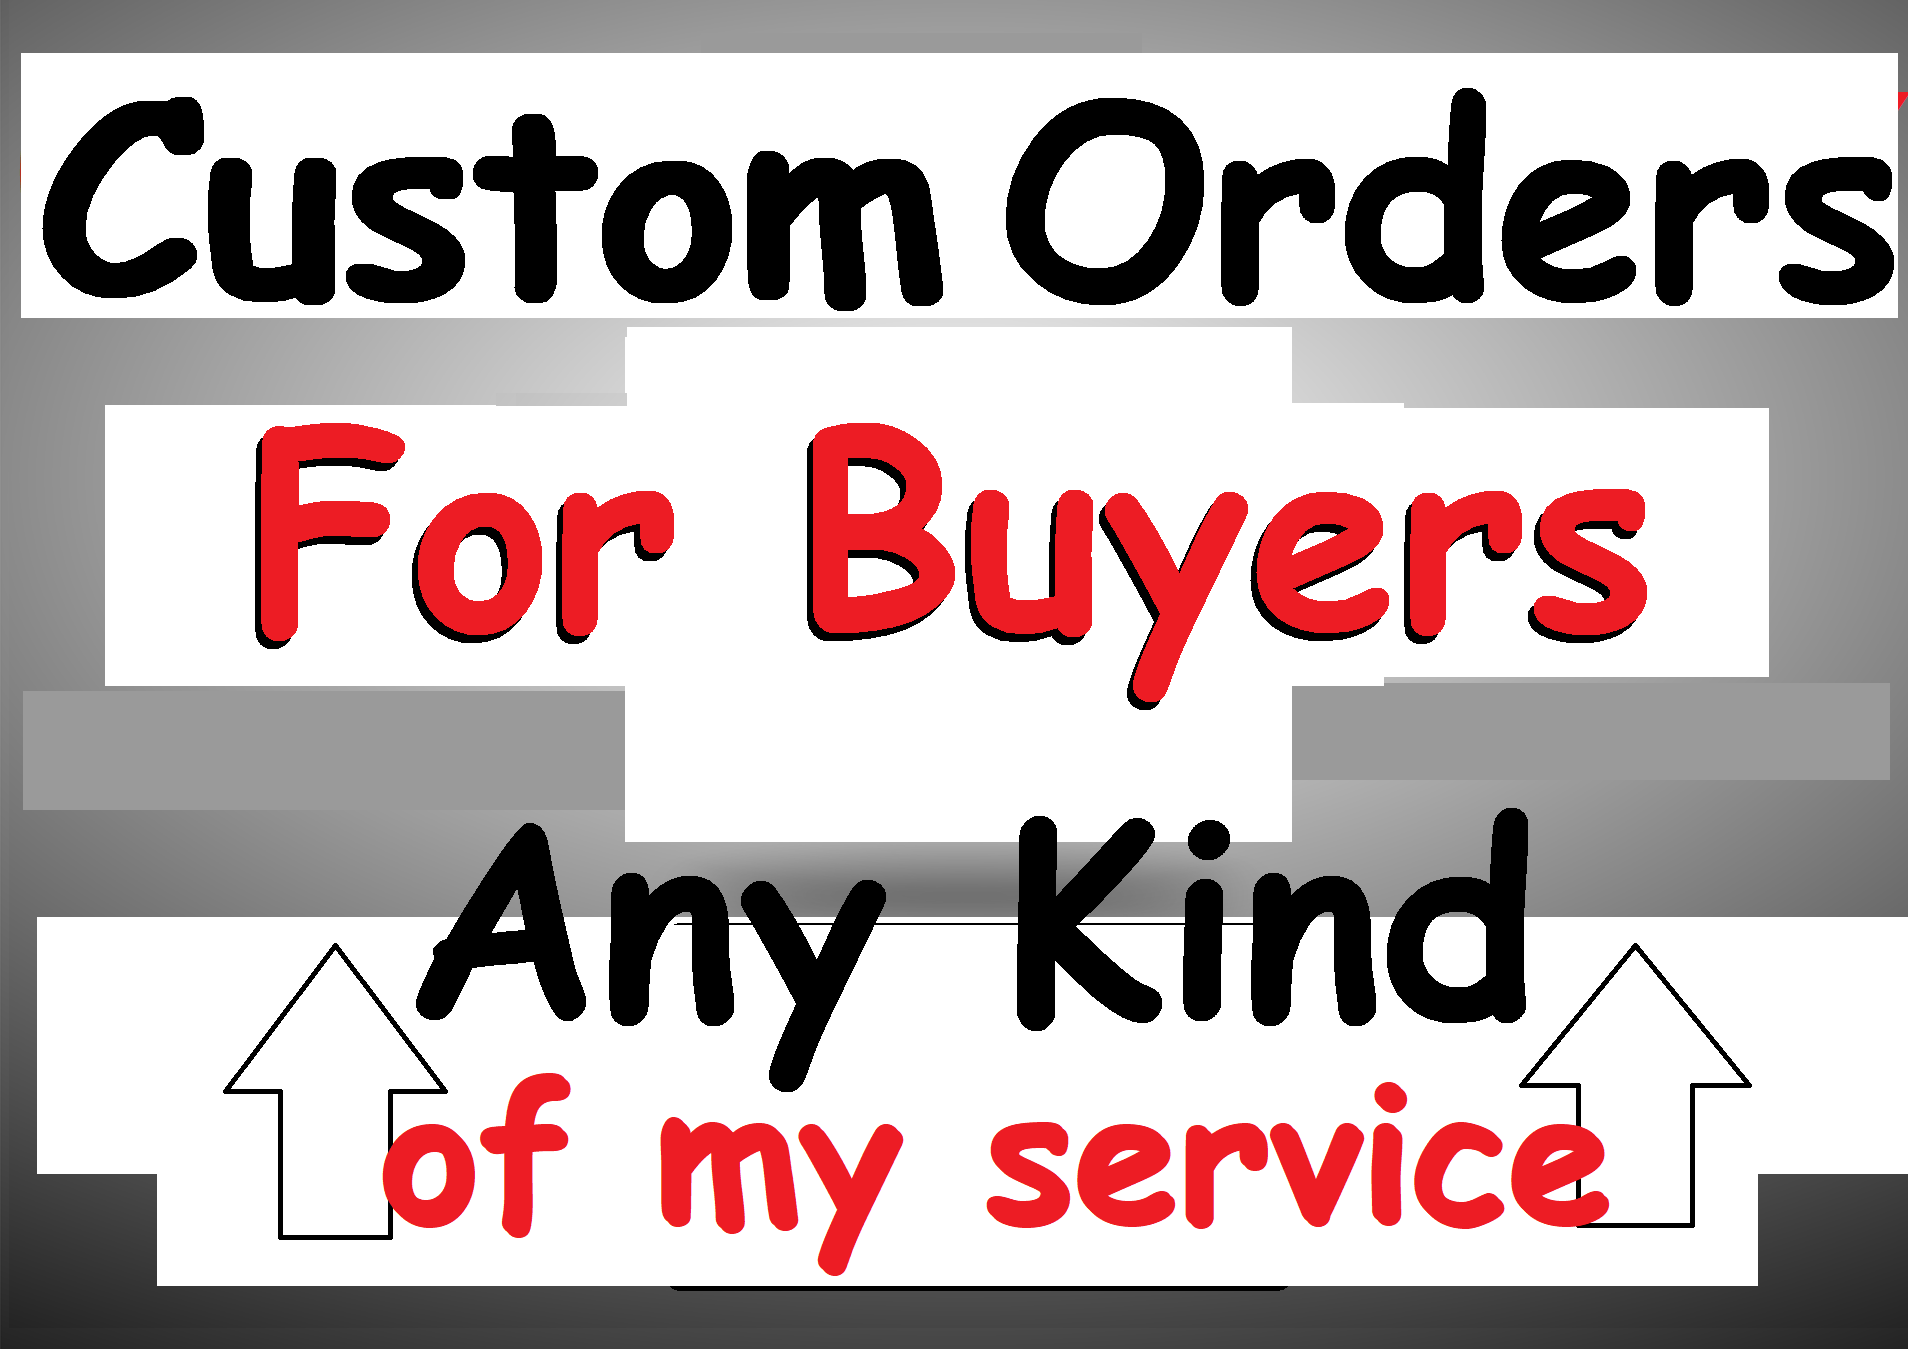 custom order for my buyer services within delivery time 